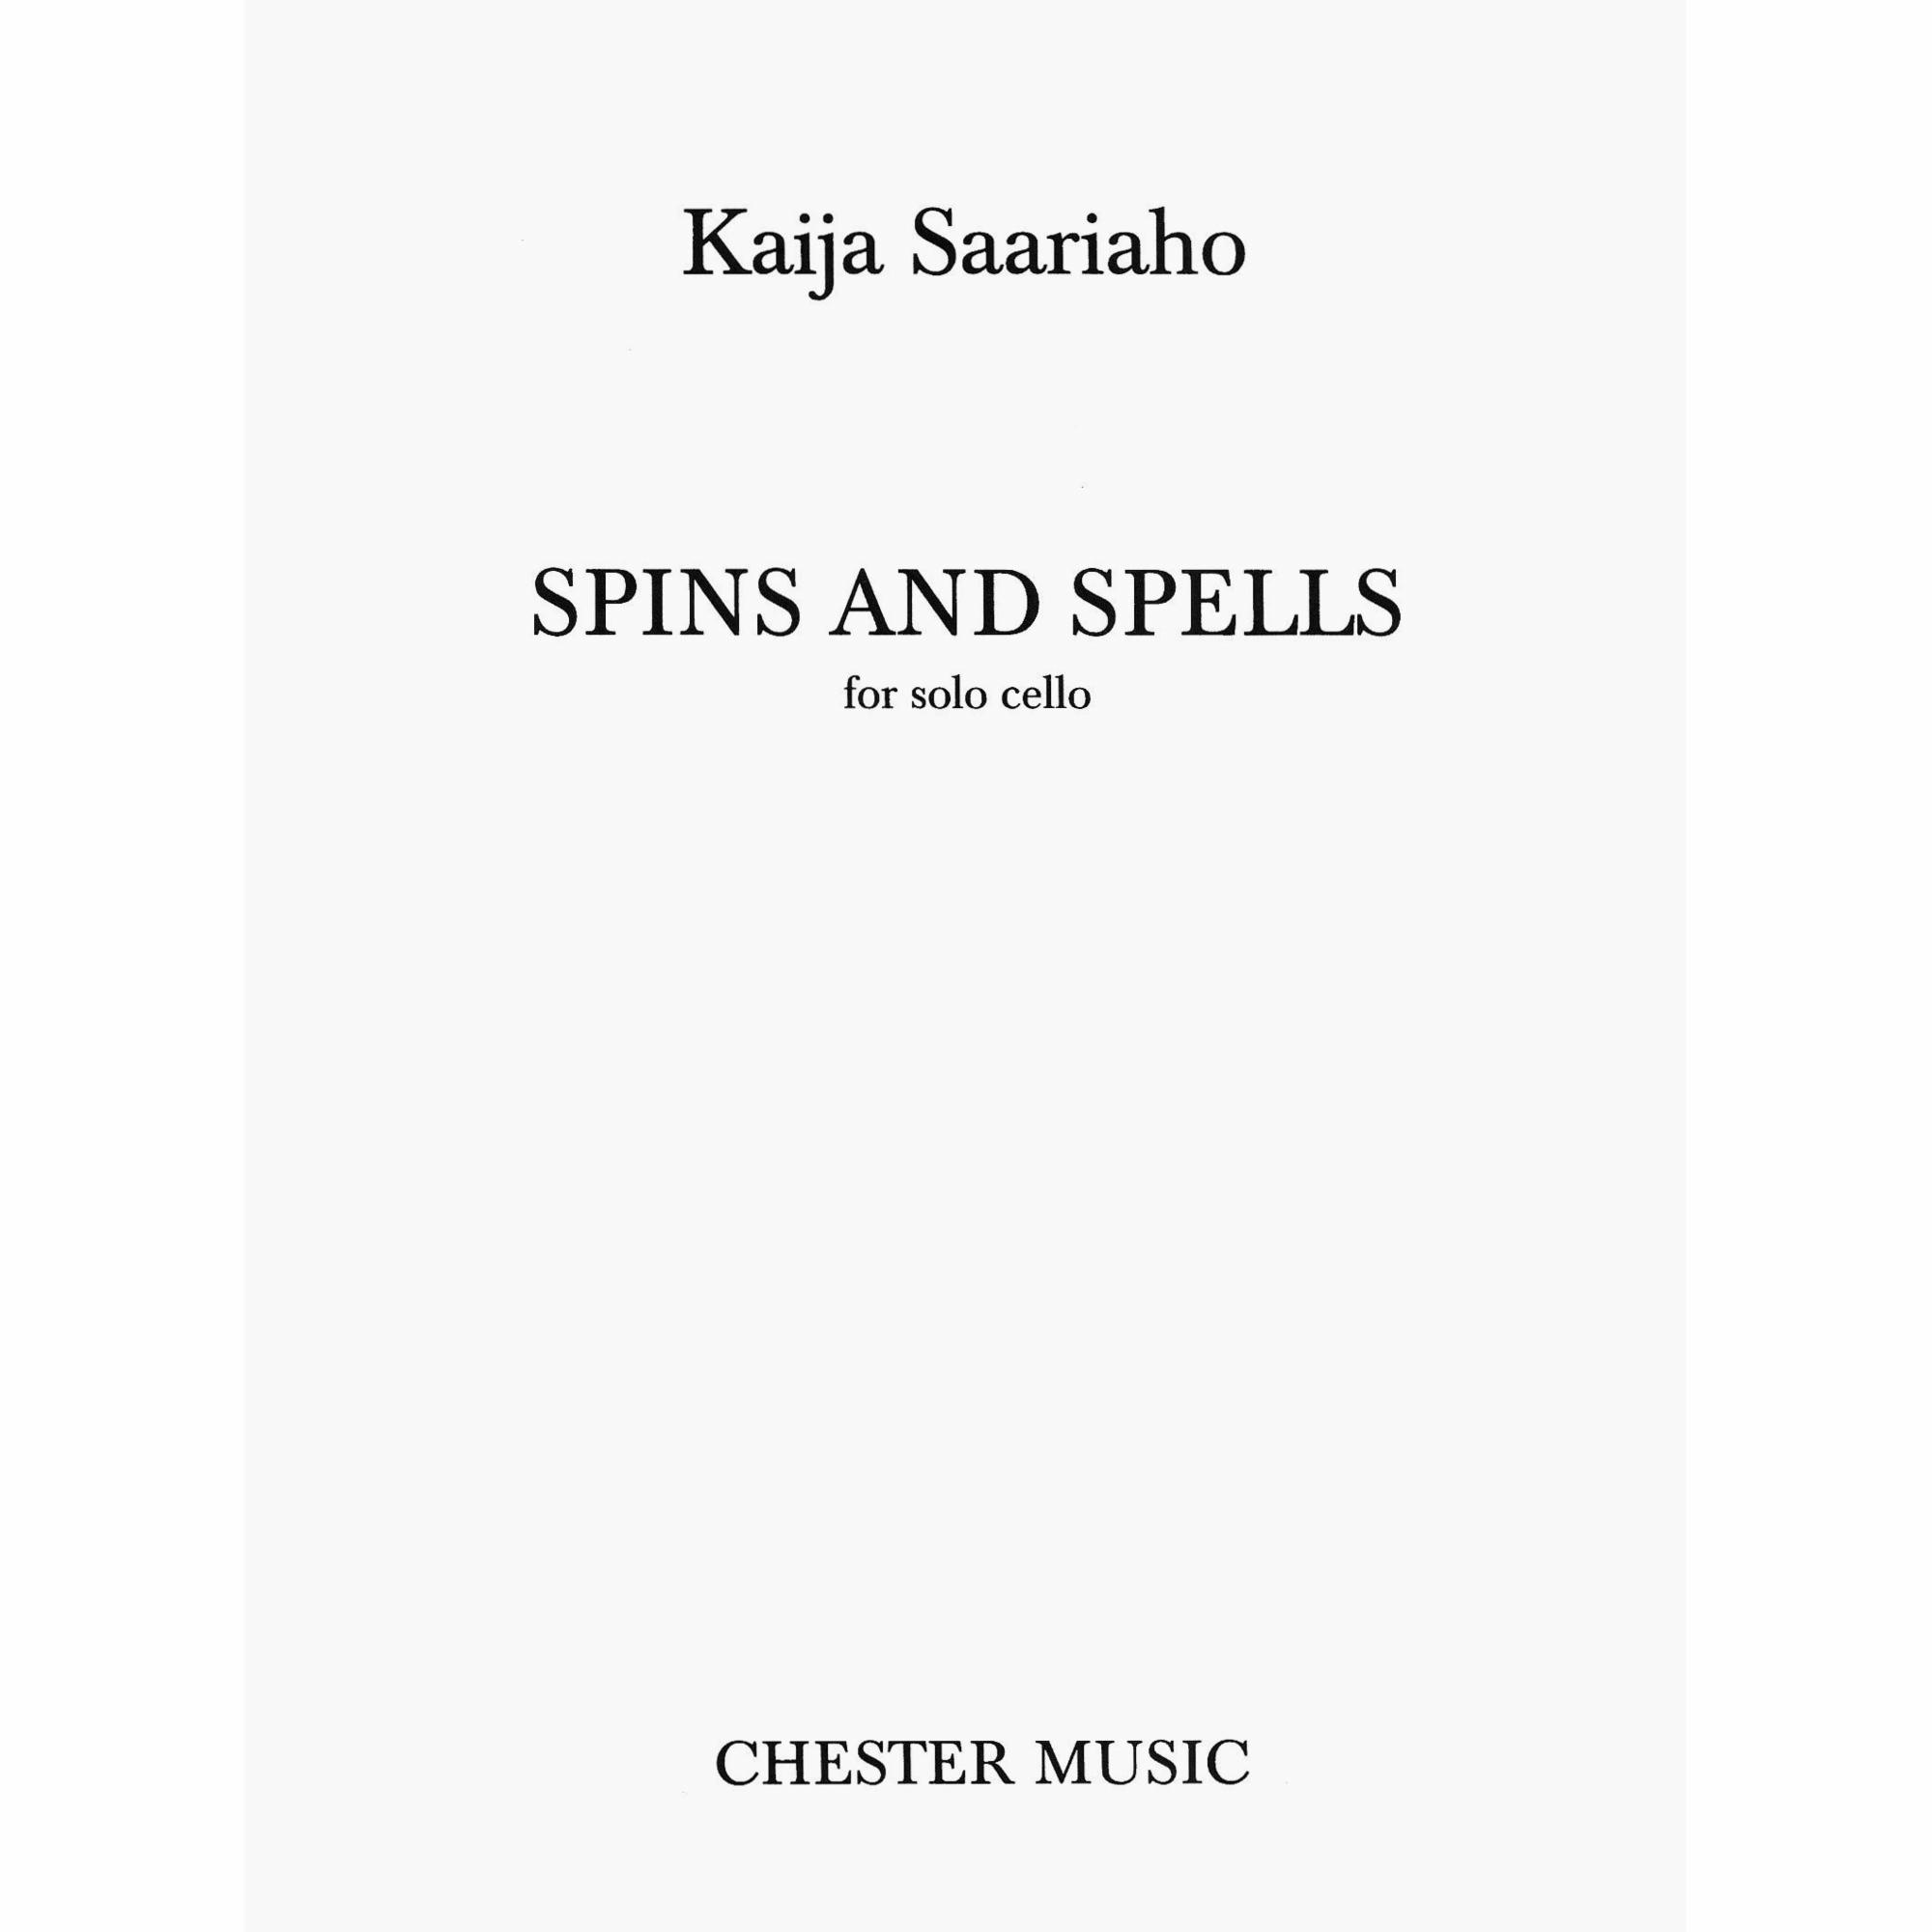 Saariaho -- Spins and Spells for Solo Cello